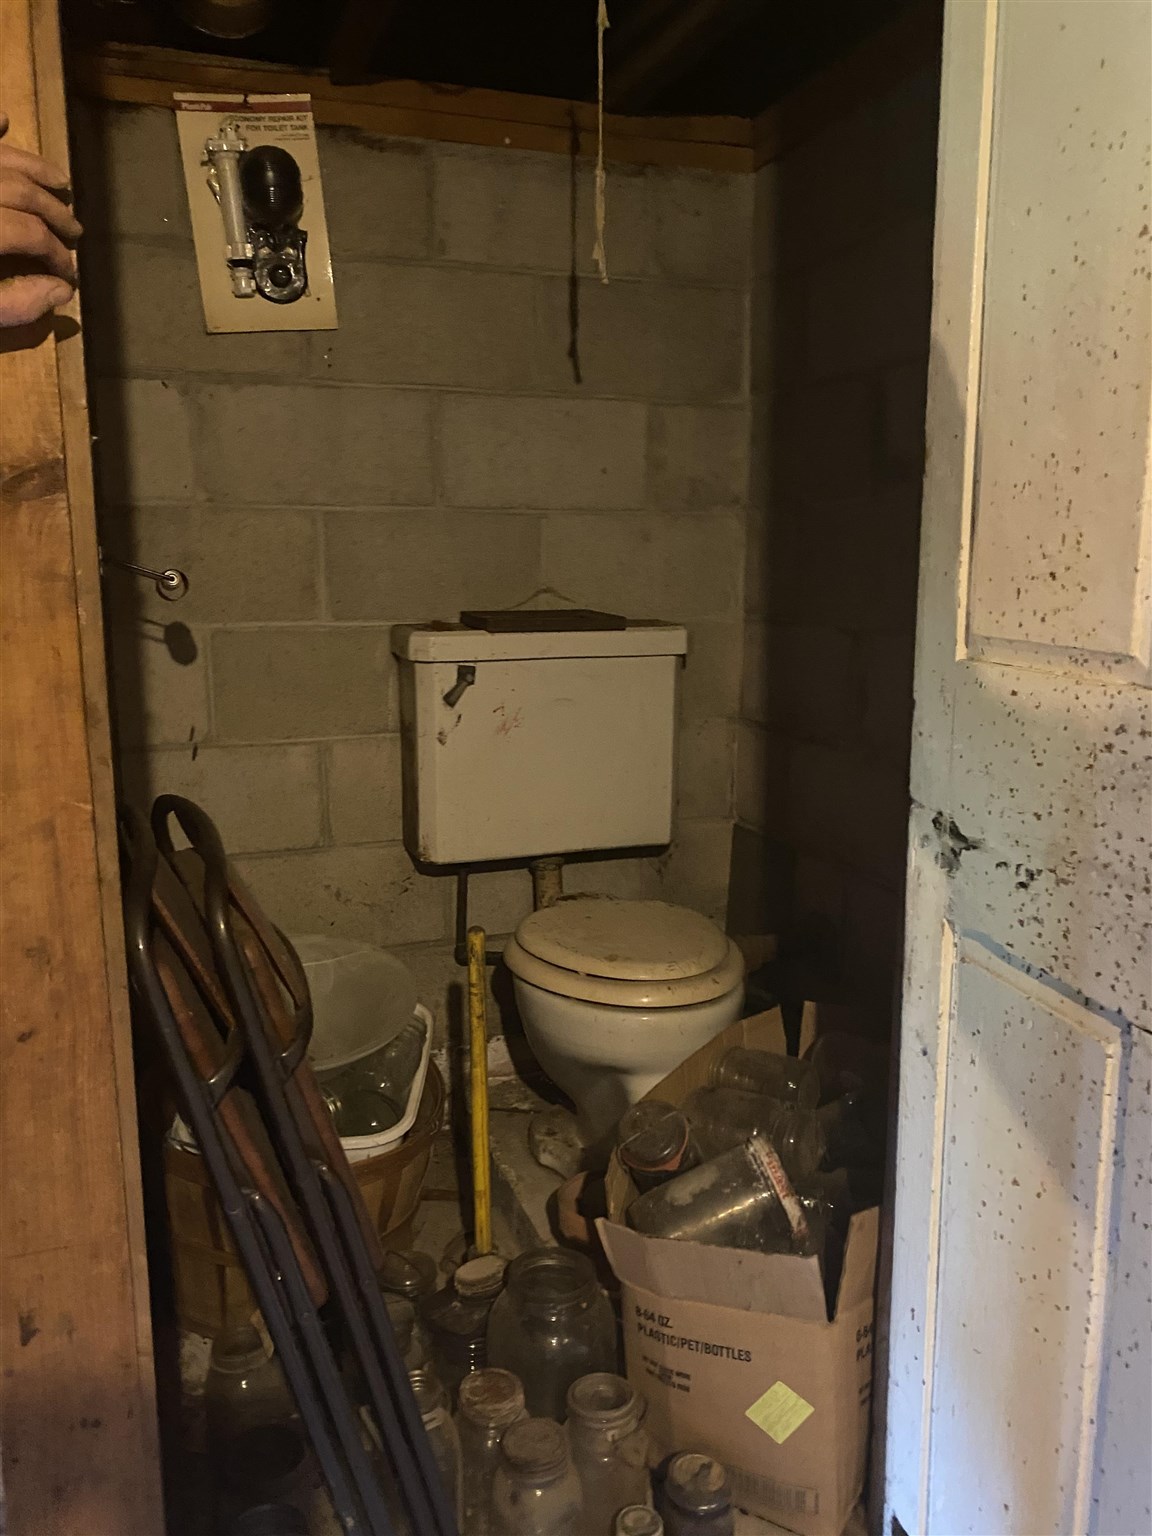 The toilet is hooked up but currently not in use.